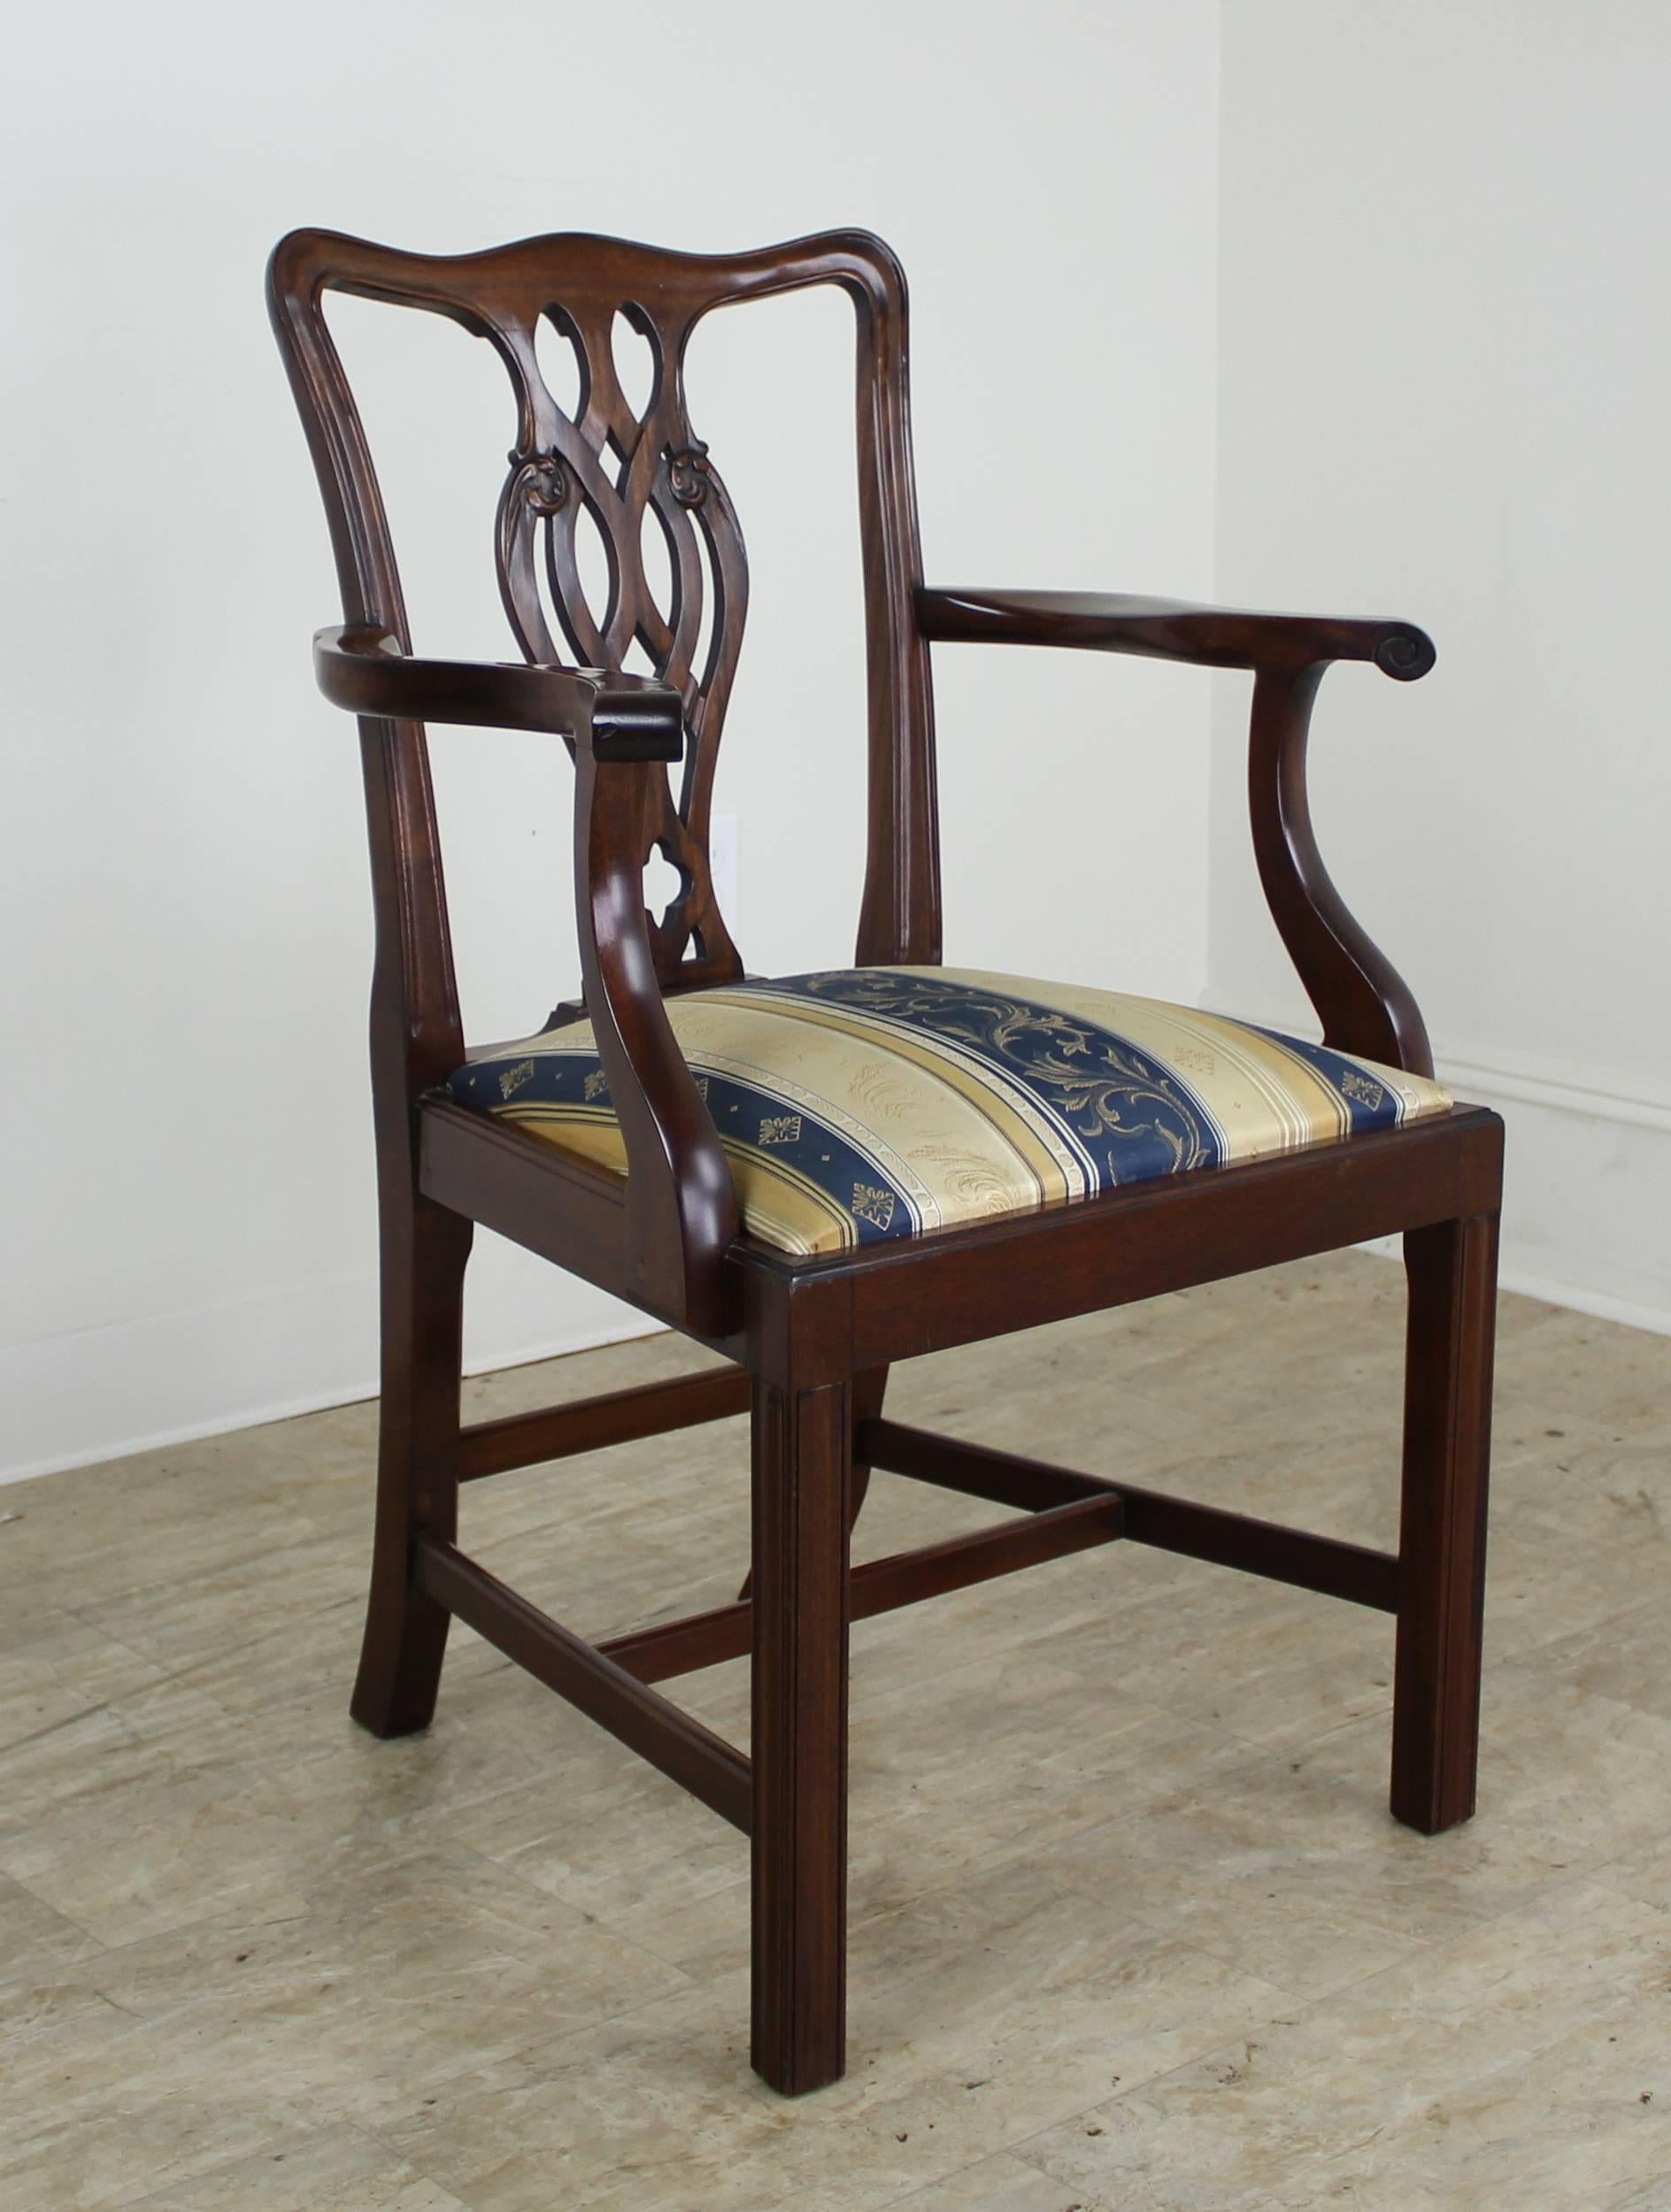 A full set of very handsome fine Chippendale style chairs. Two arms and six sides. The chairs are in a beautiful mahogany with exceptional color and a rich patina. There is some color variation due to light exposure over the years, but all chairs